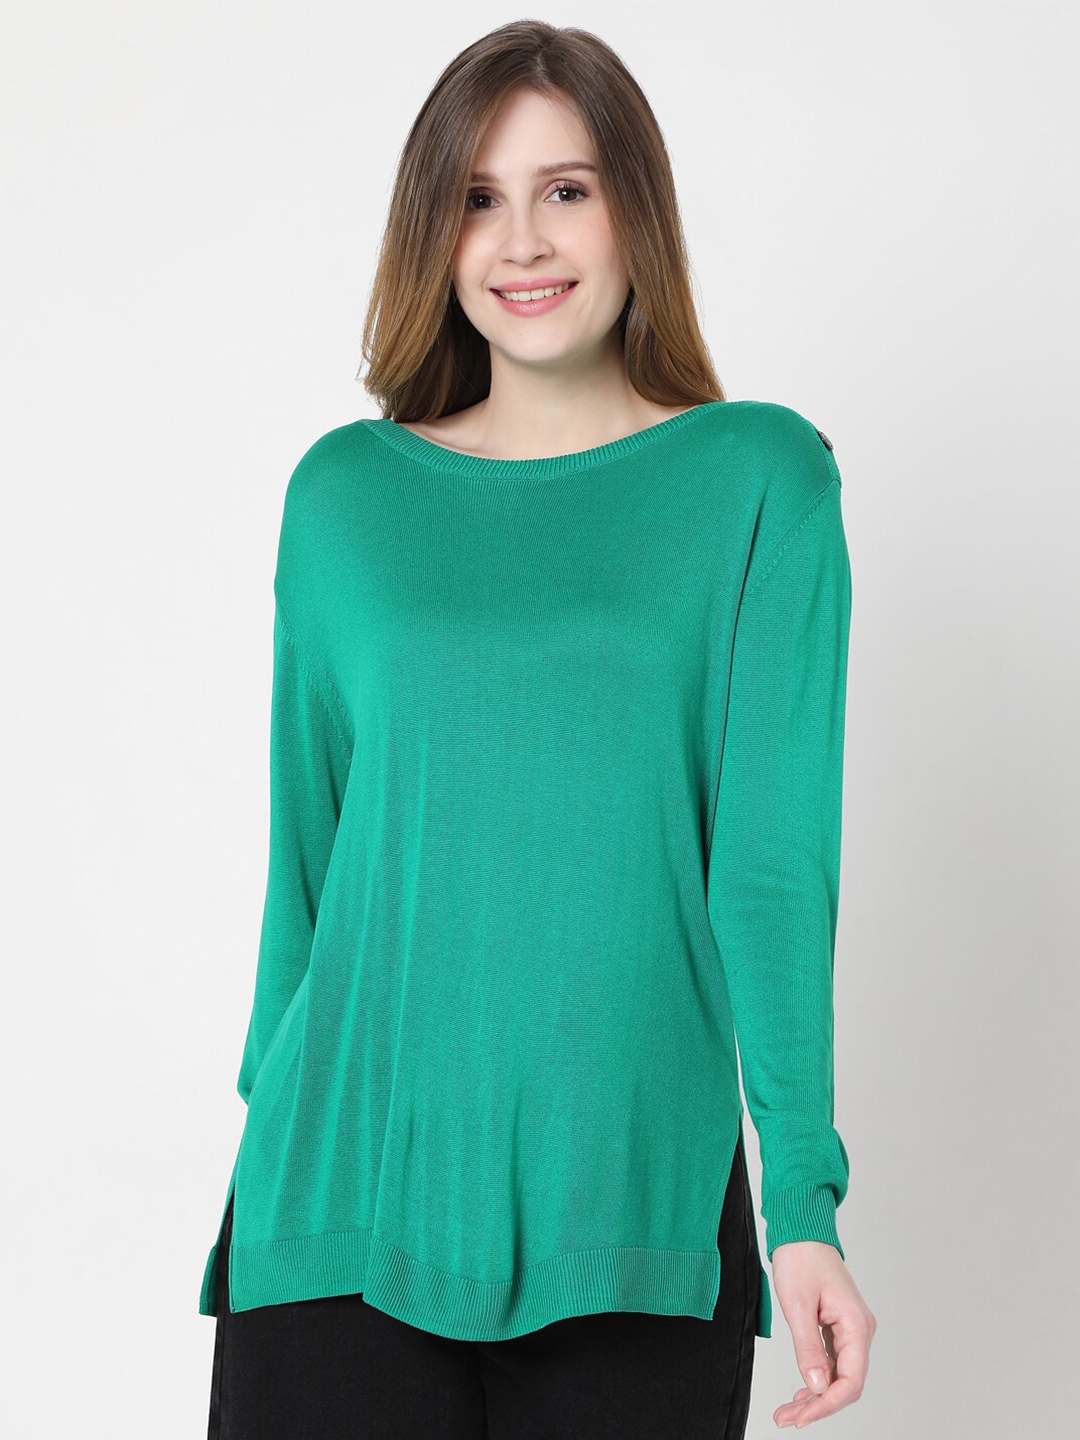 Vero Moda Women Green Solid Pullover with Side Slits Price in India